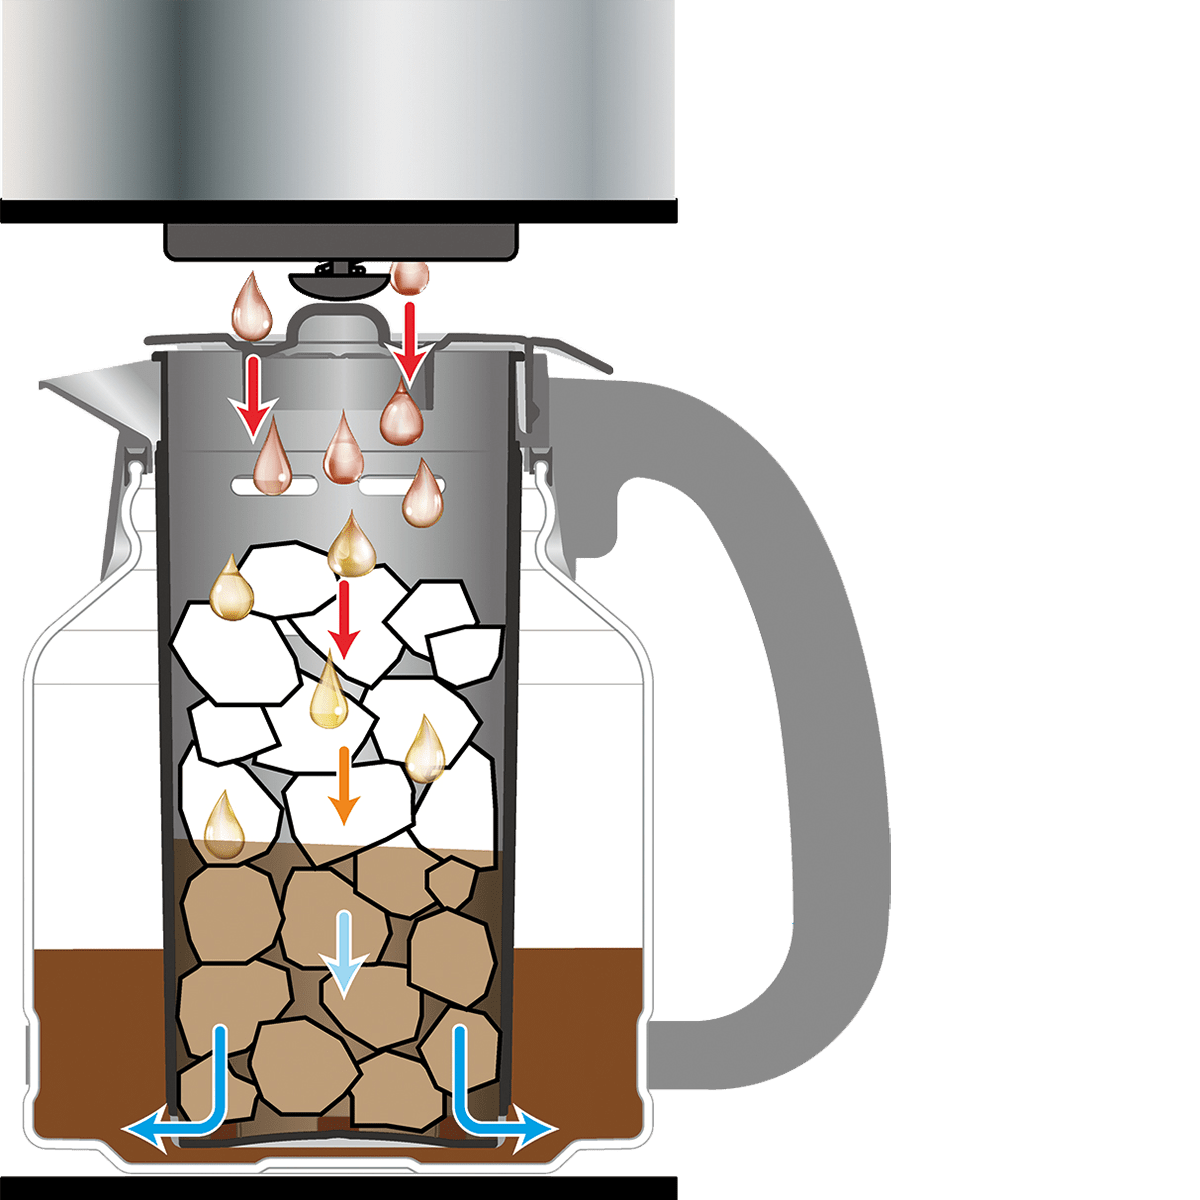 https://s3-assets.quenchessentials.com/media/images/products/zojirushi-ec-ygc120xb-coffee-maker-iced-coffee-graphic.png